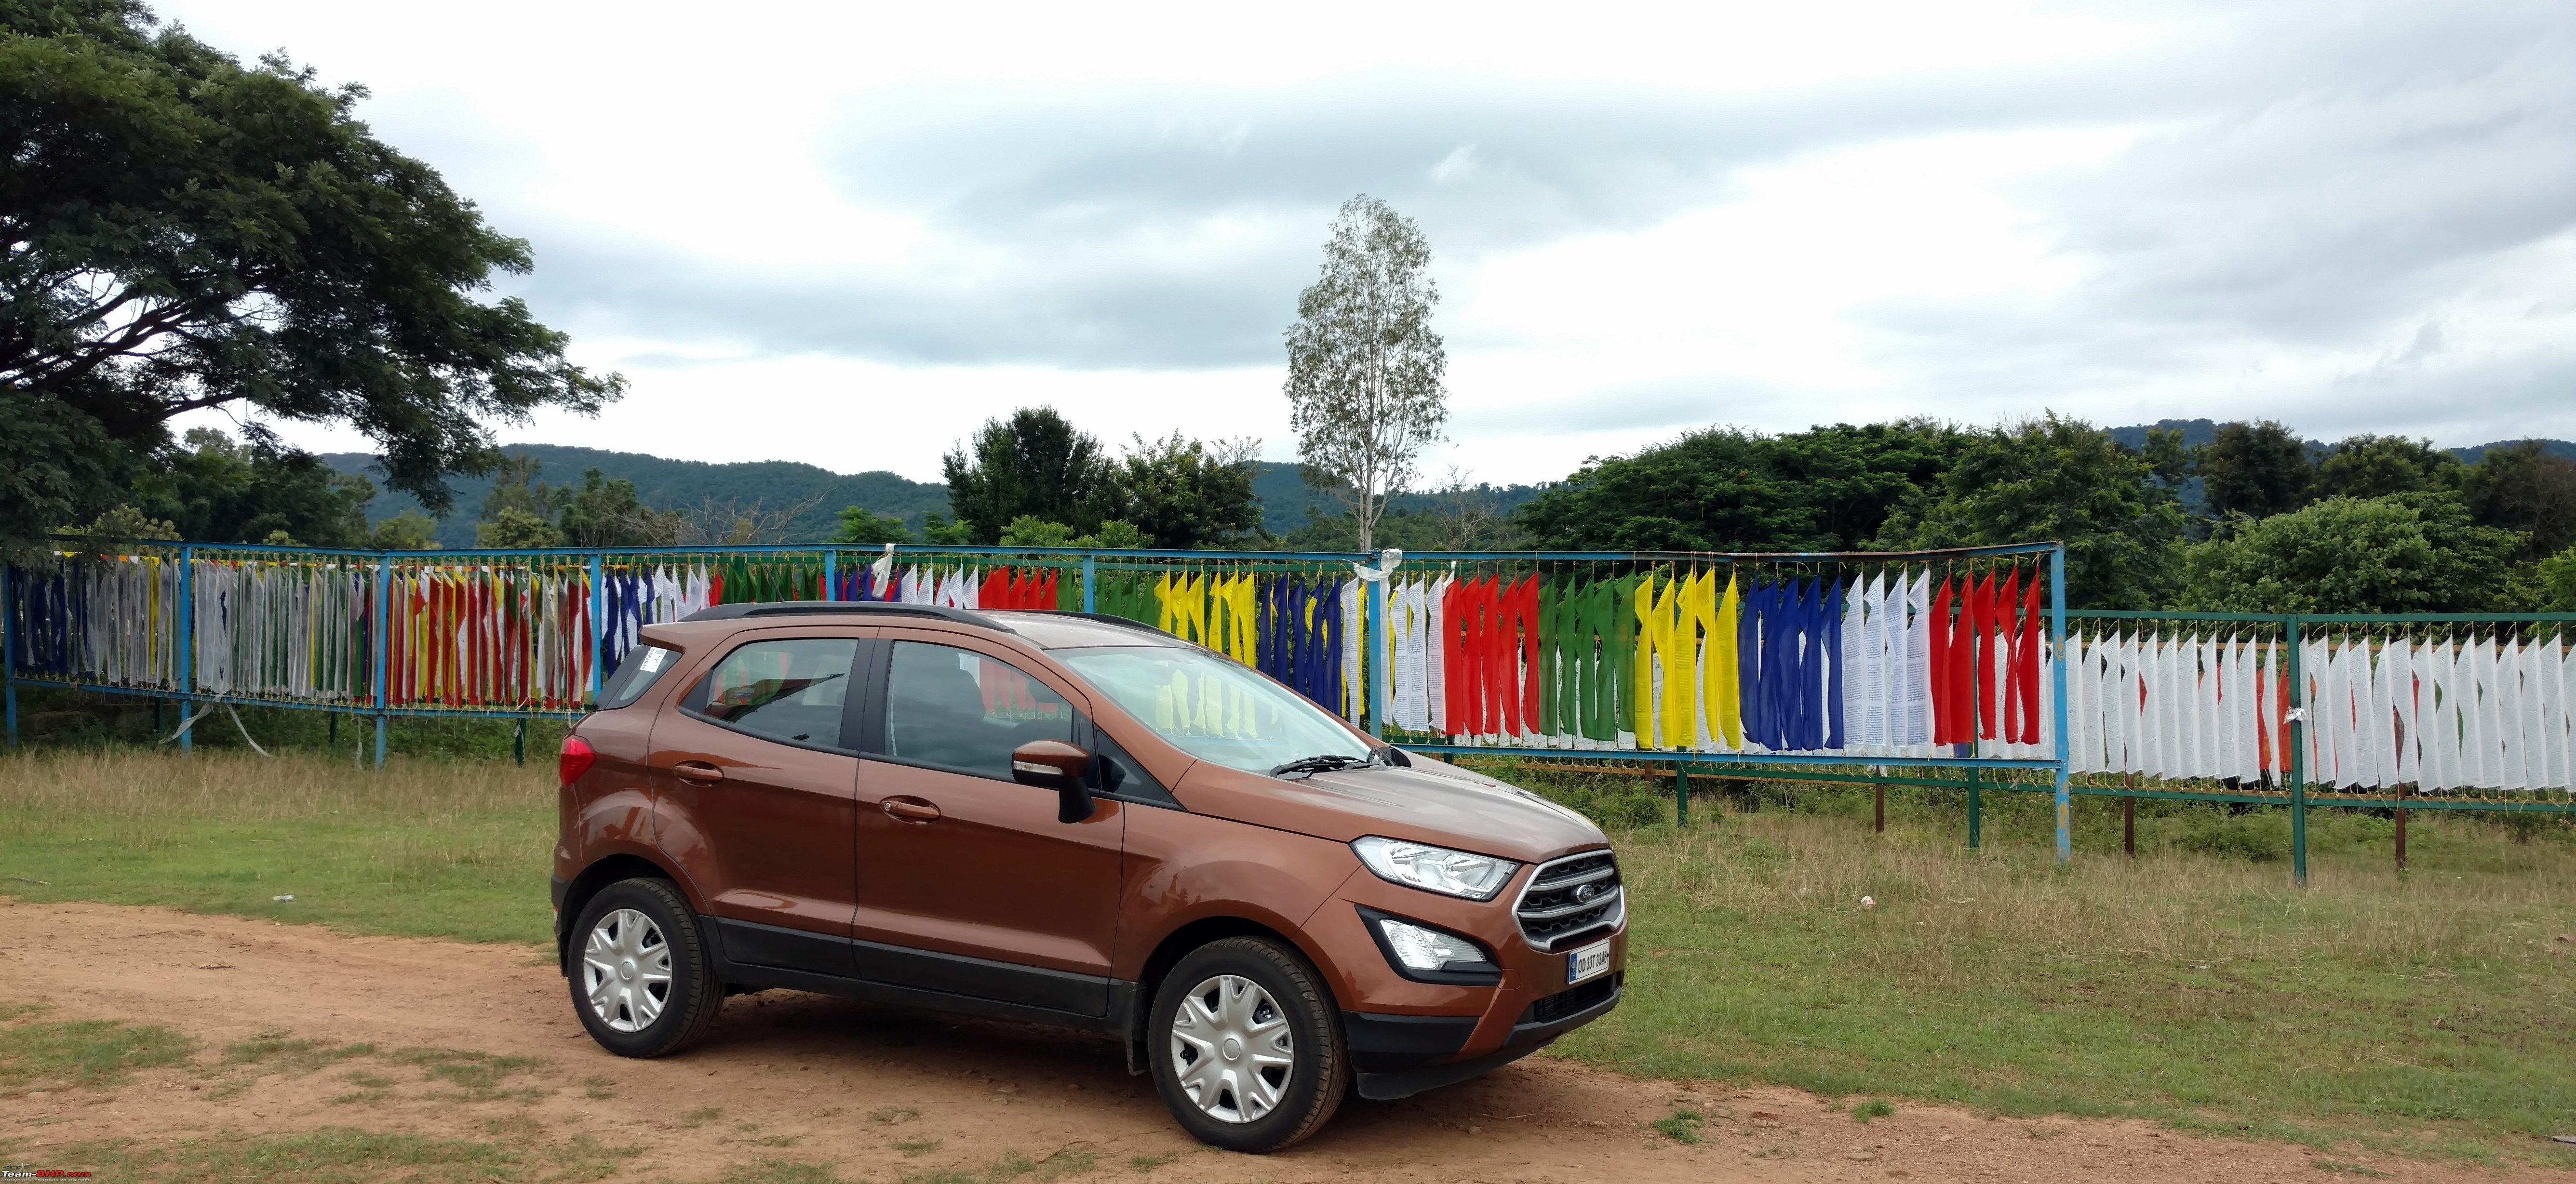 SUV Review: 2018 Ford EcoSport